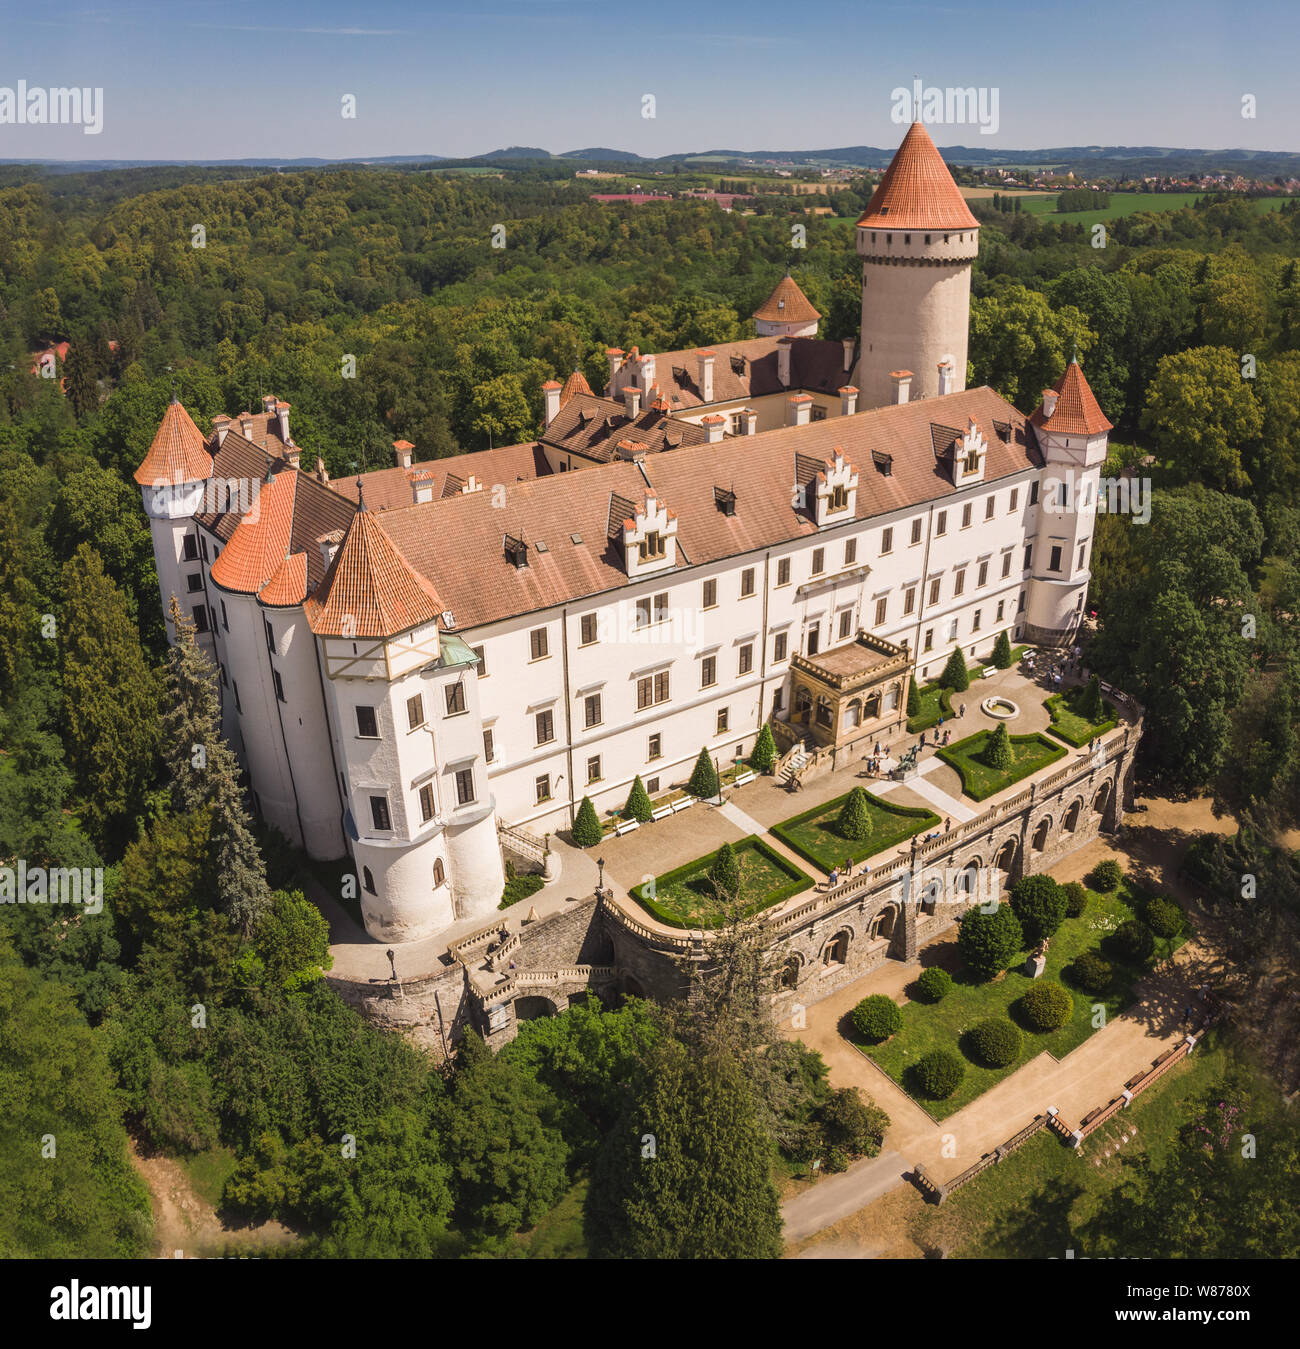 Medieval Konopiste castle or château in Czech Republic - residence of Habsburg imperial family Stock Photo